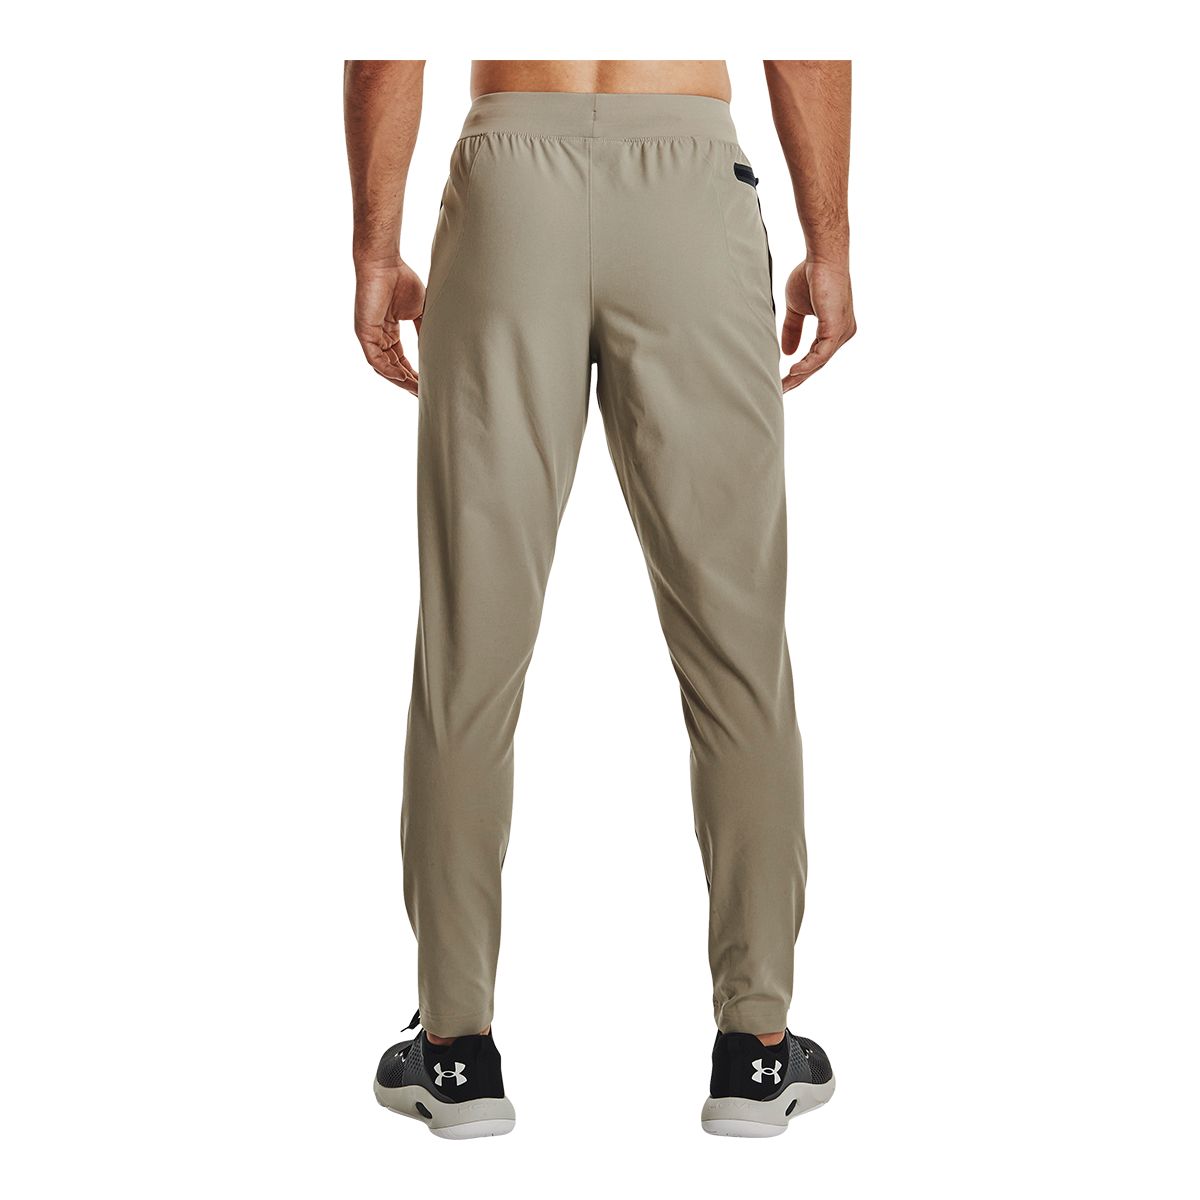 Under Armour 1366215 0001 Stretch Woven Pant M black - Buy Online